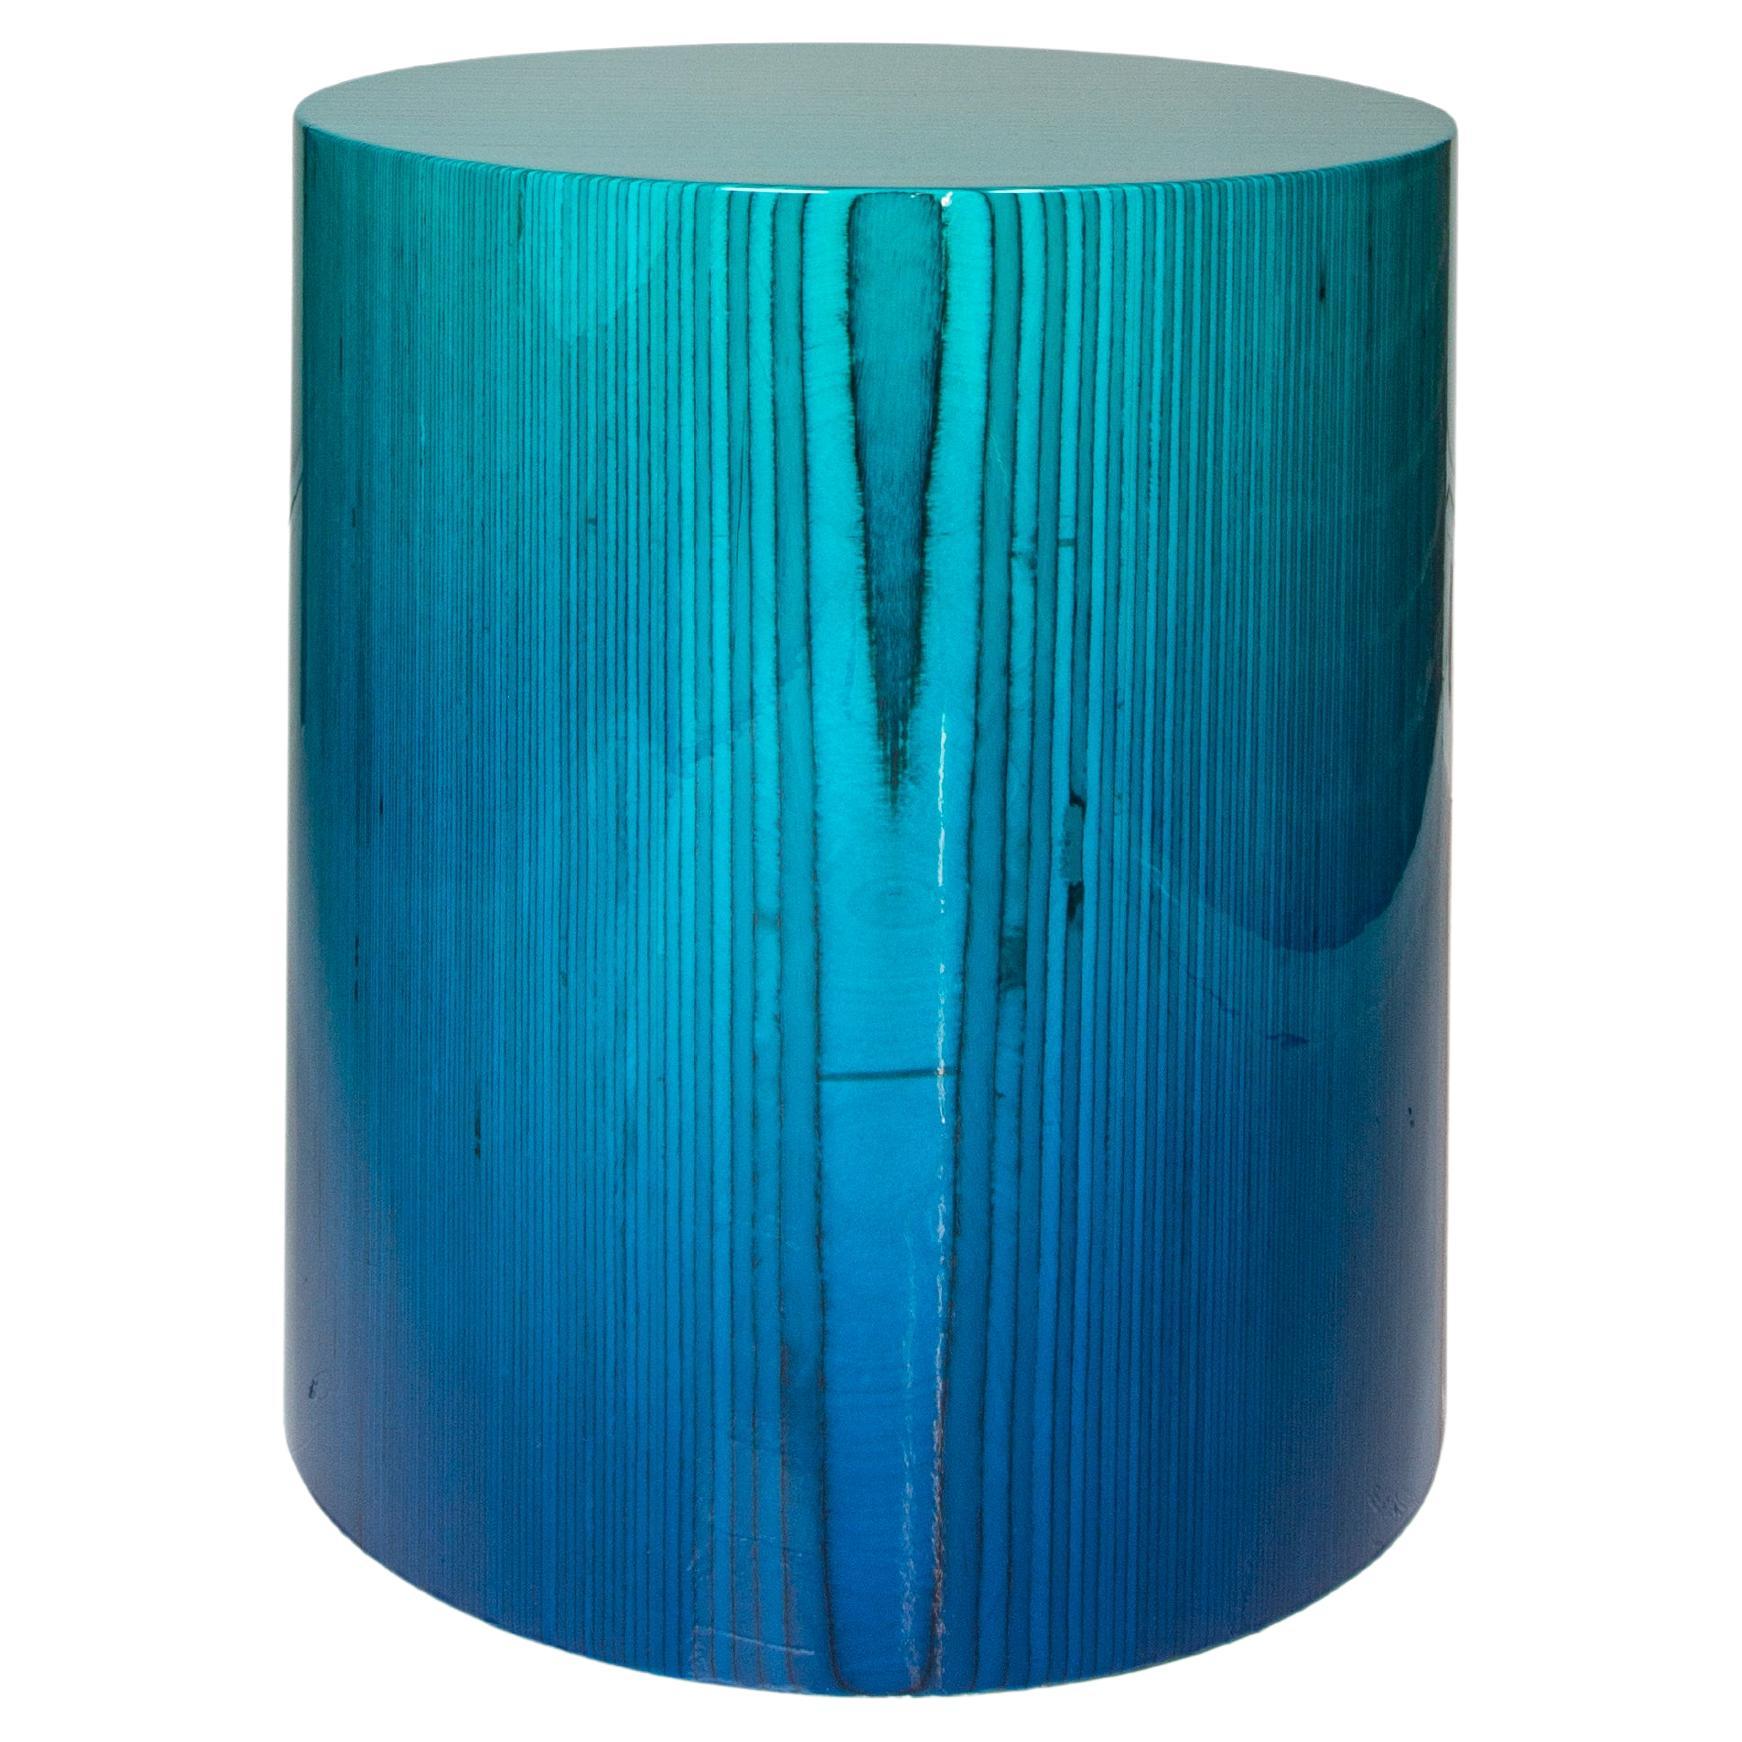 Stack Vert Stool or Side Table in Teal by Timbur, Represented by Tuleste Factory For Sale